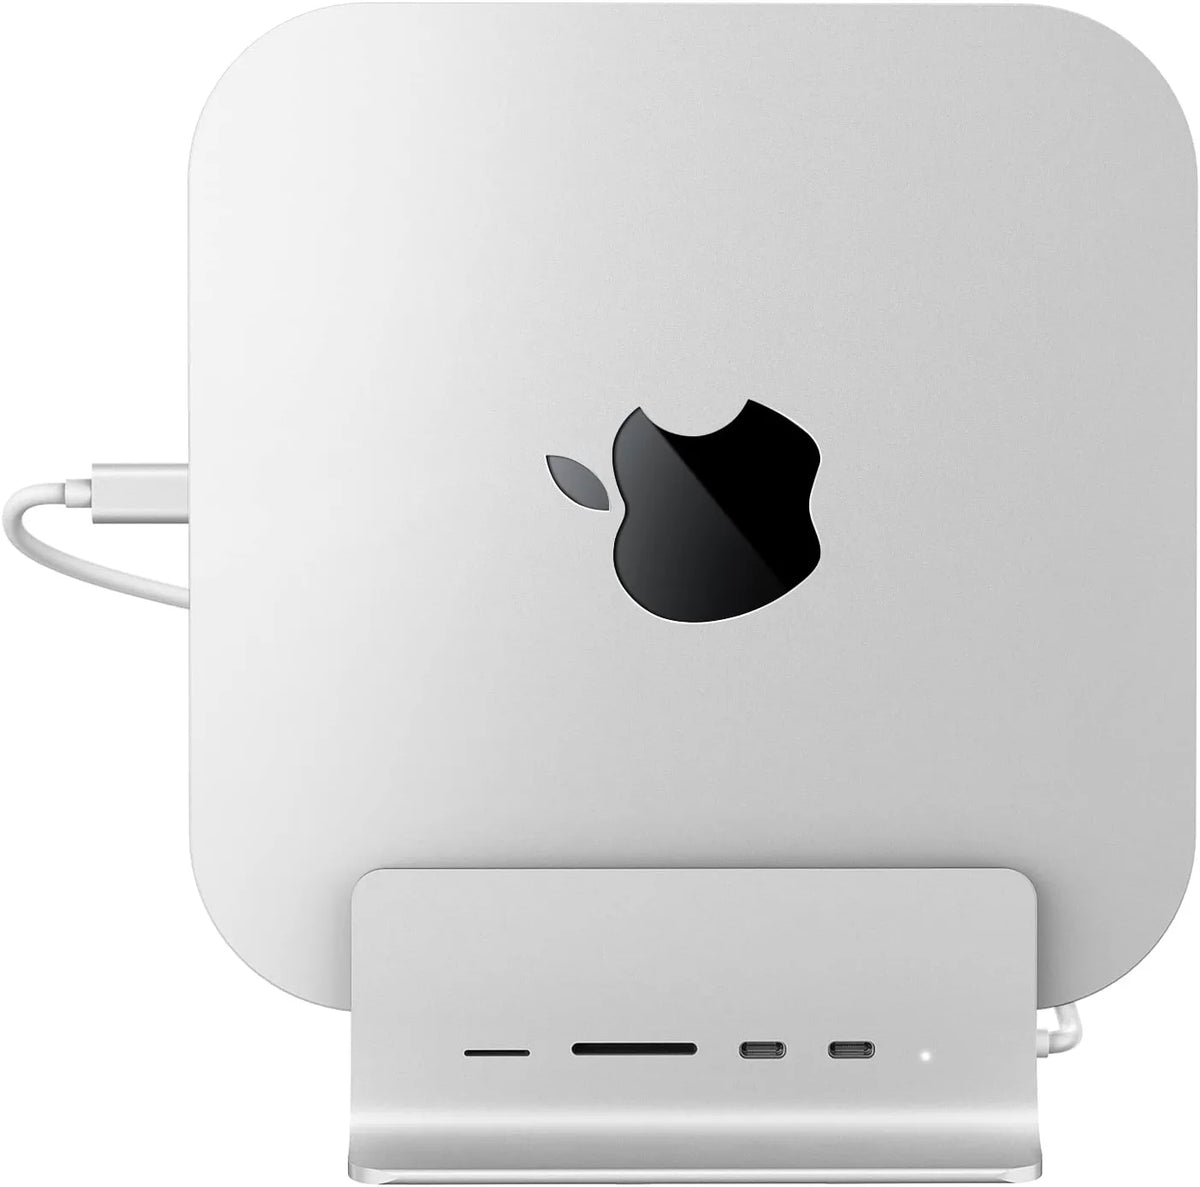 stand & hub for mac mini with ssd enclosure